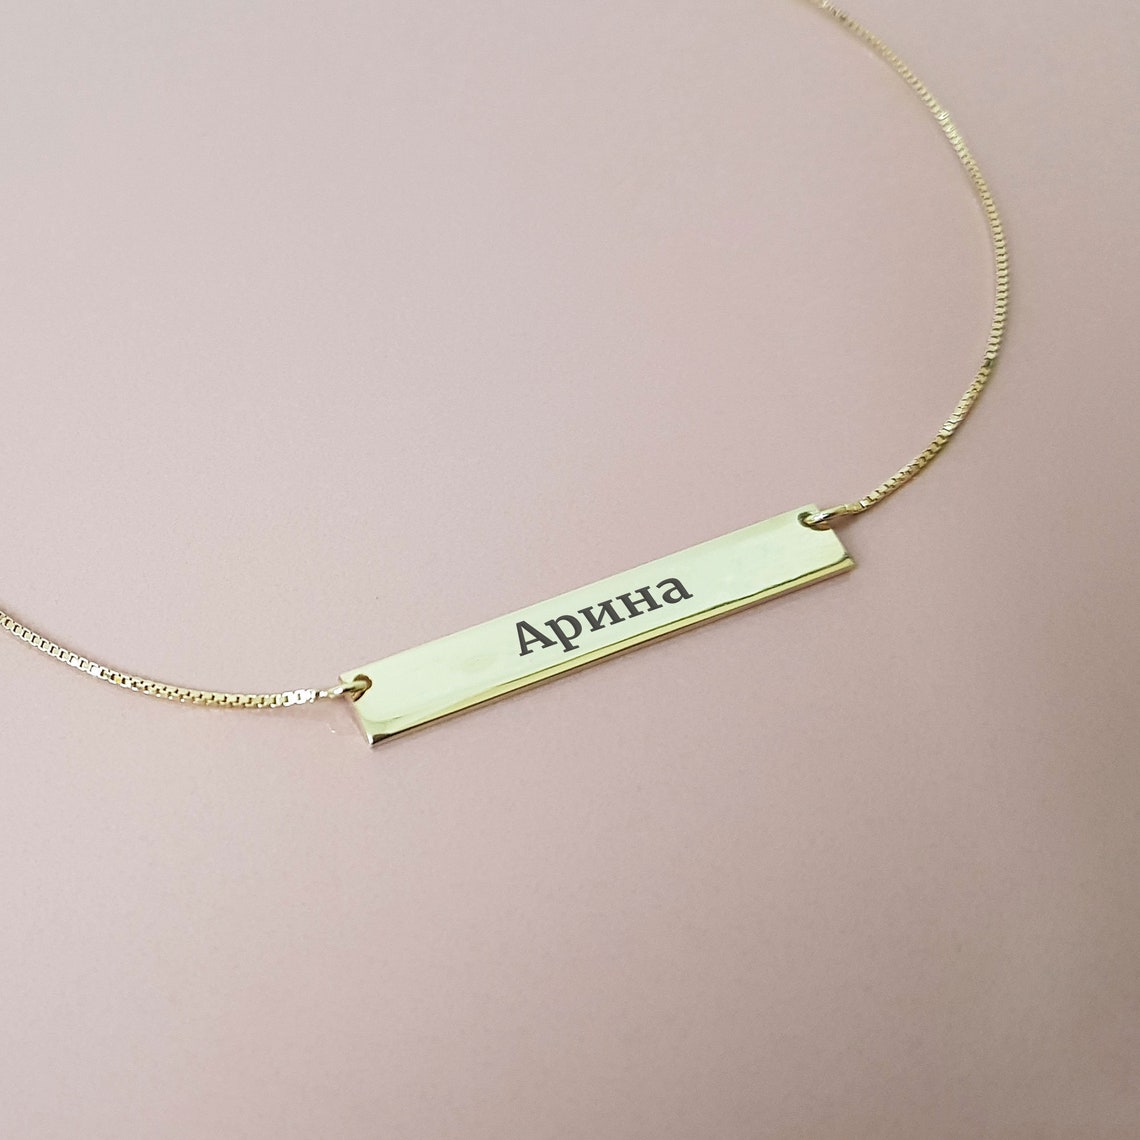 Personalized Russian Name Necklace Customize Bar Jewelry | Etsy